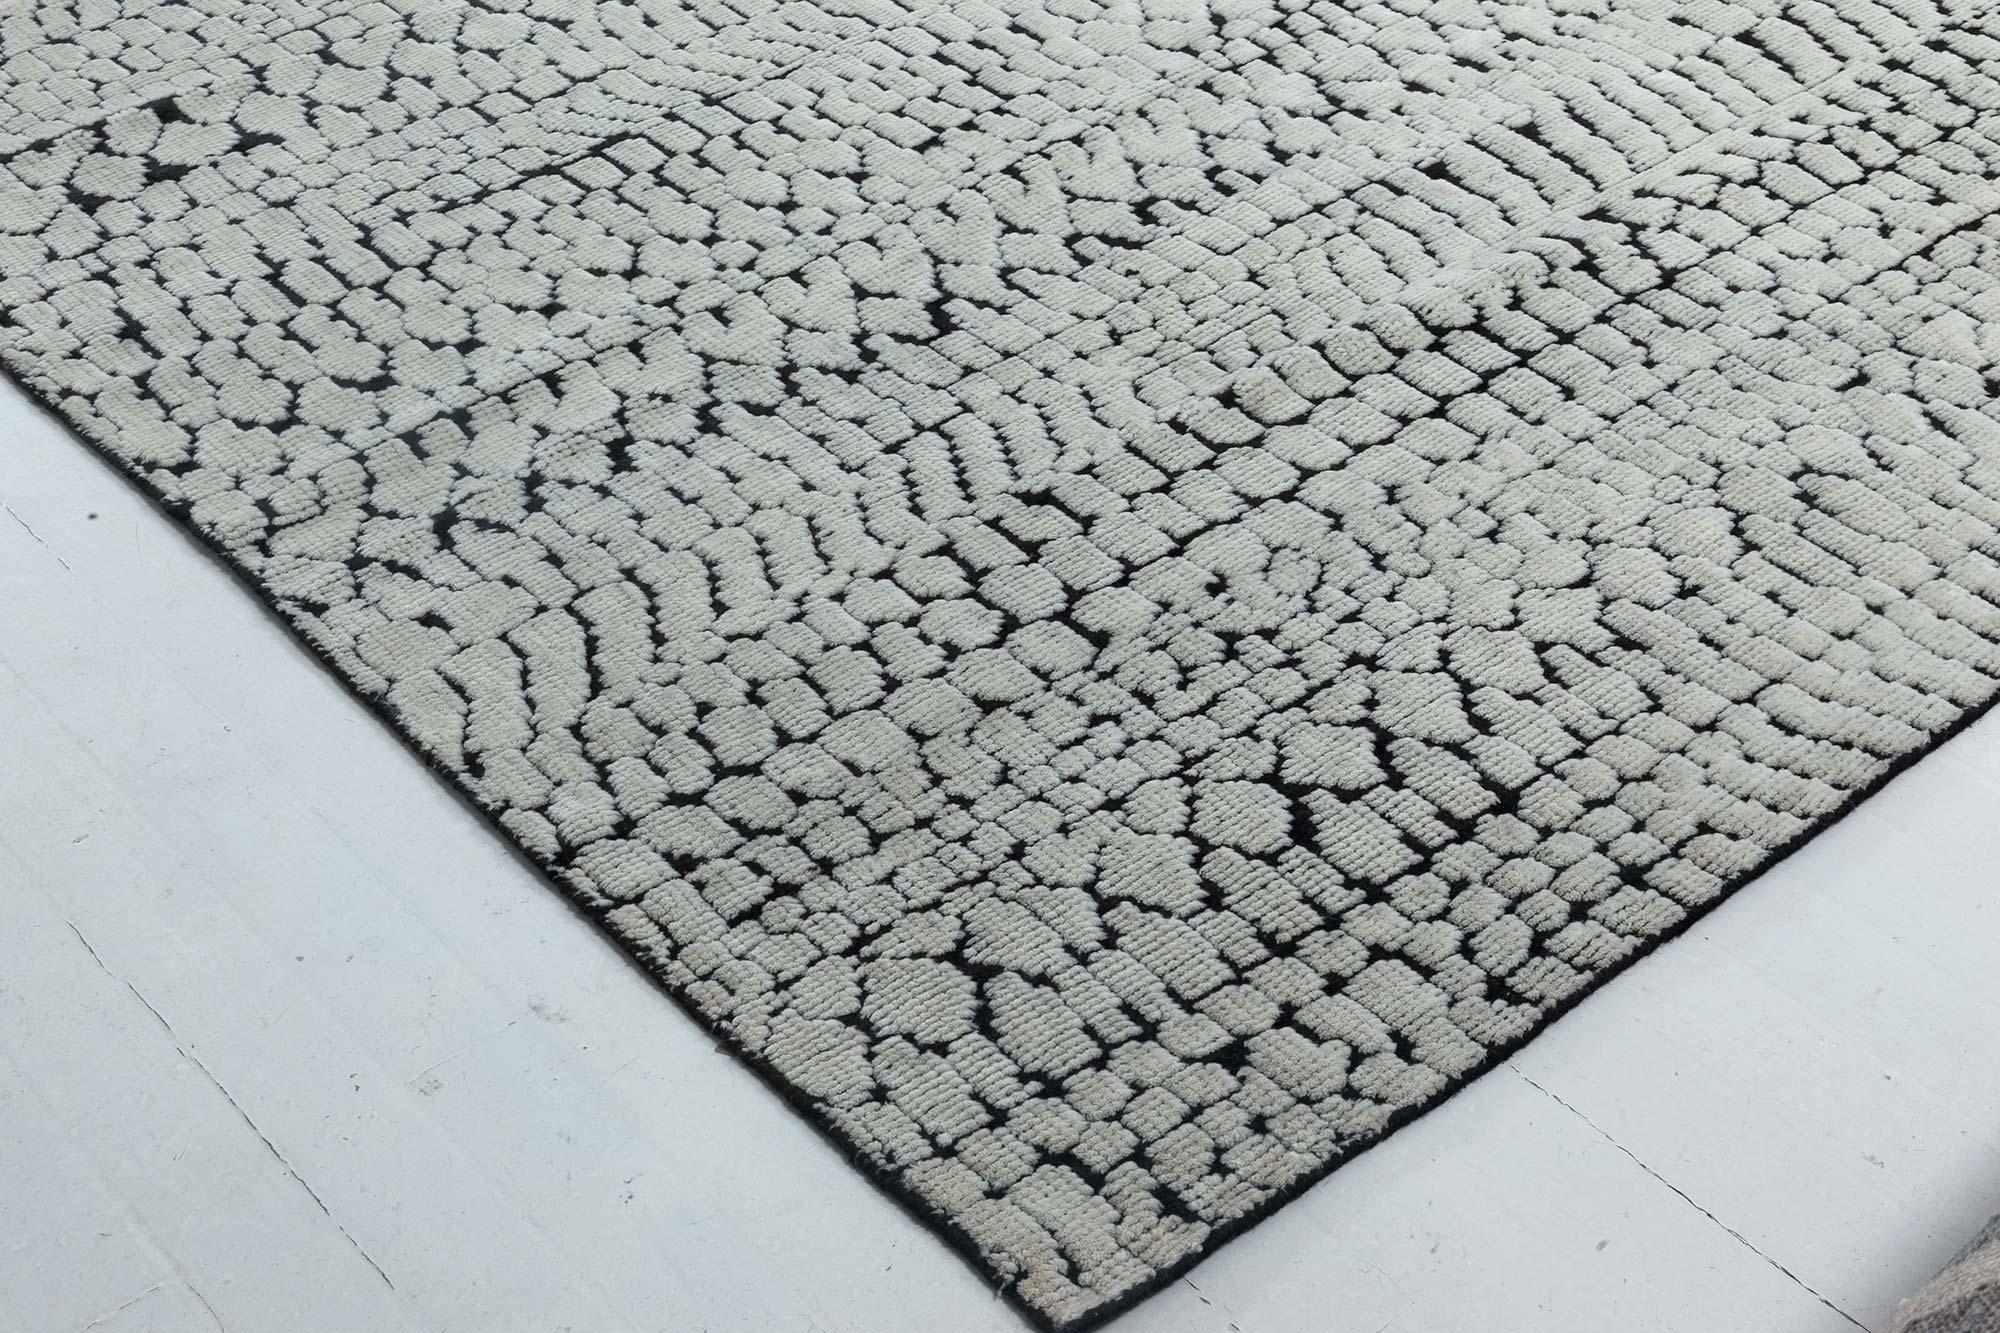 Hand-Knotted Contemporary 'Society' Black and White Handmade Wool Rug by Doris Leslie Blau For Sale